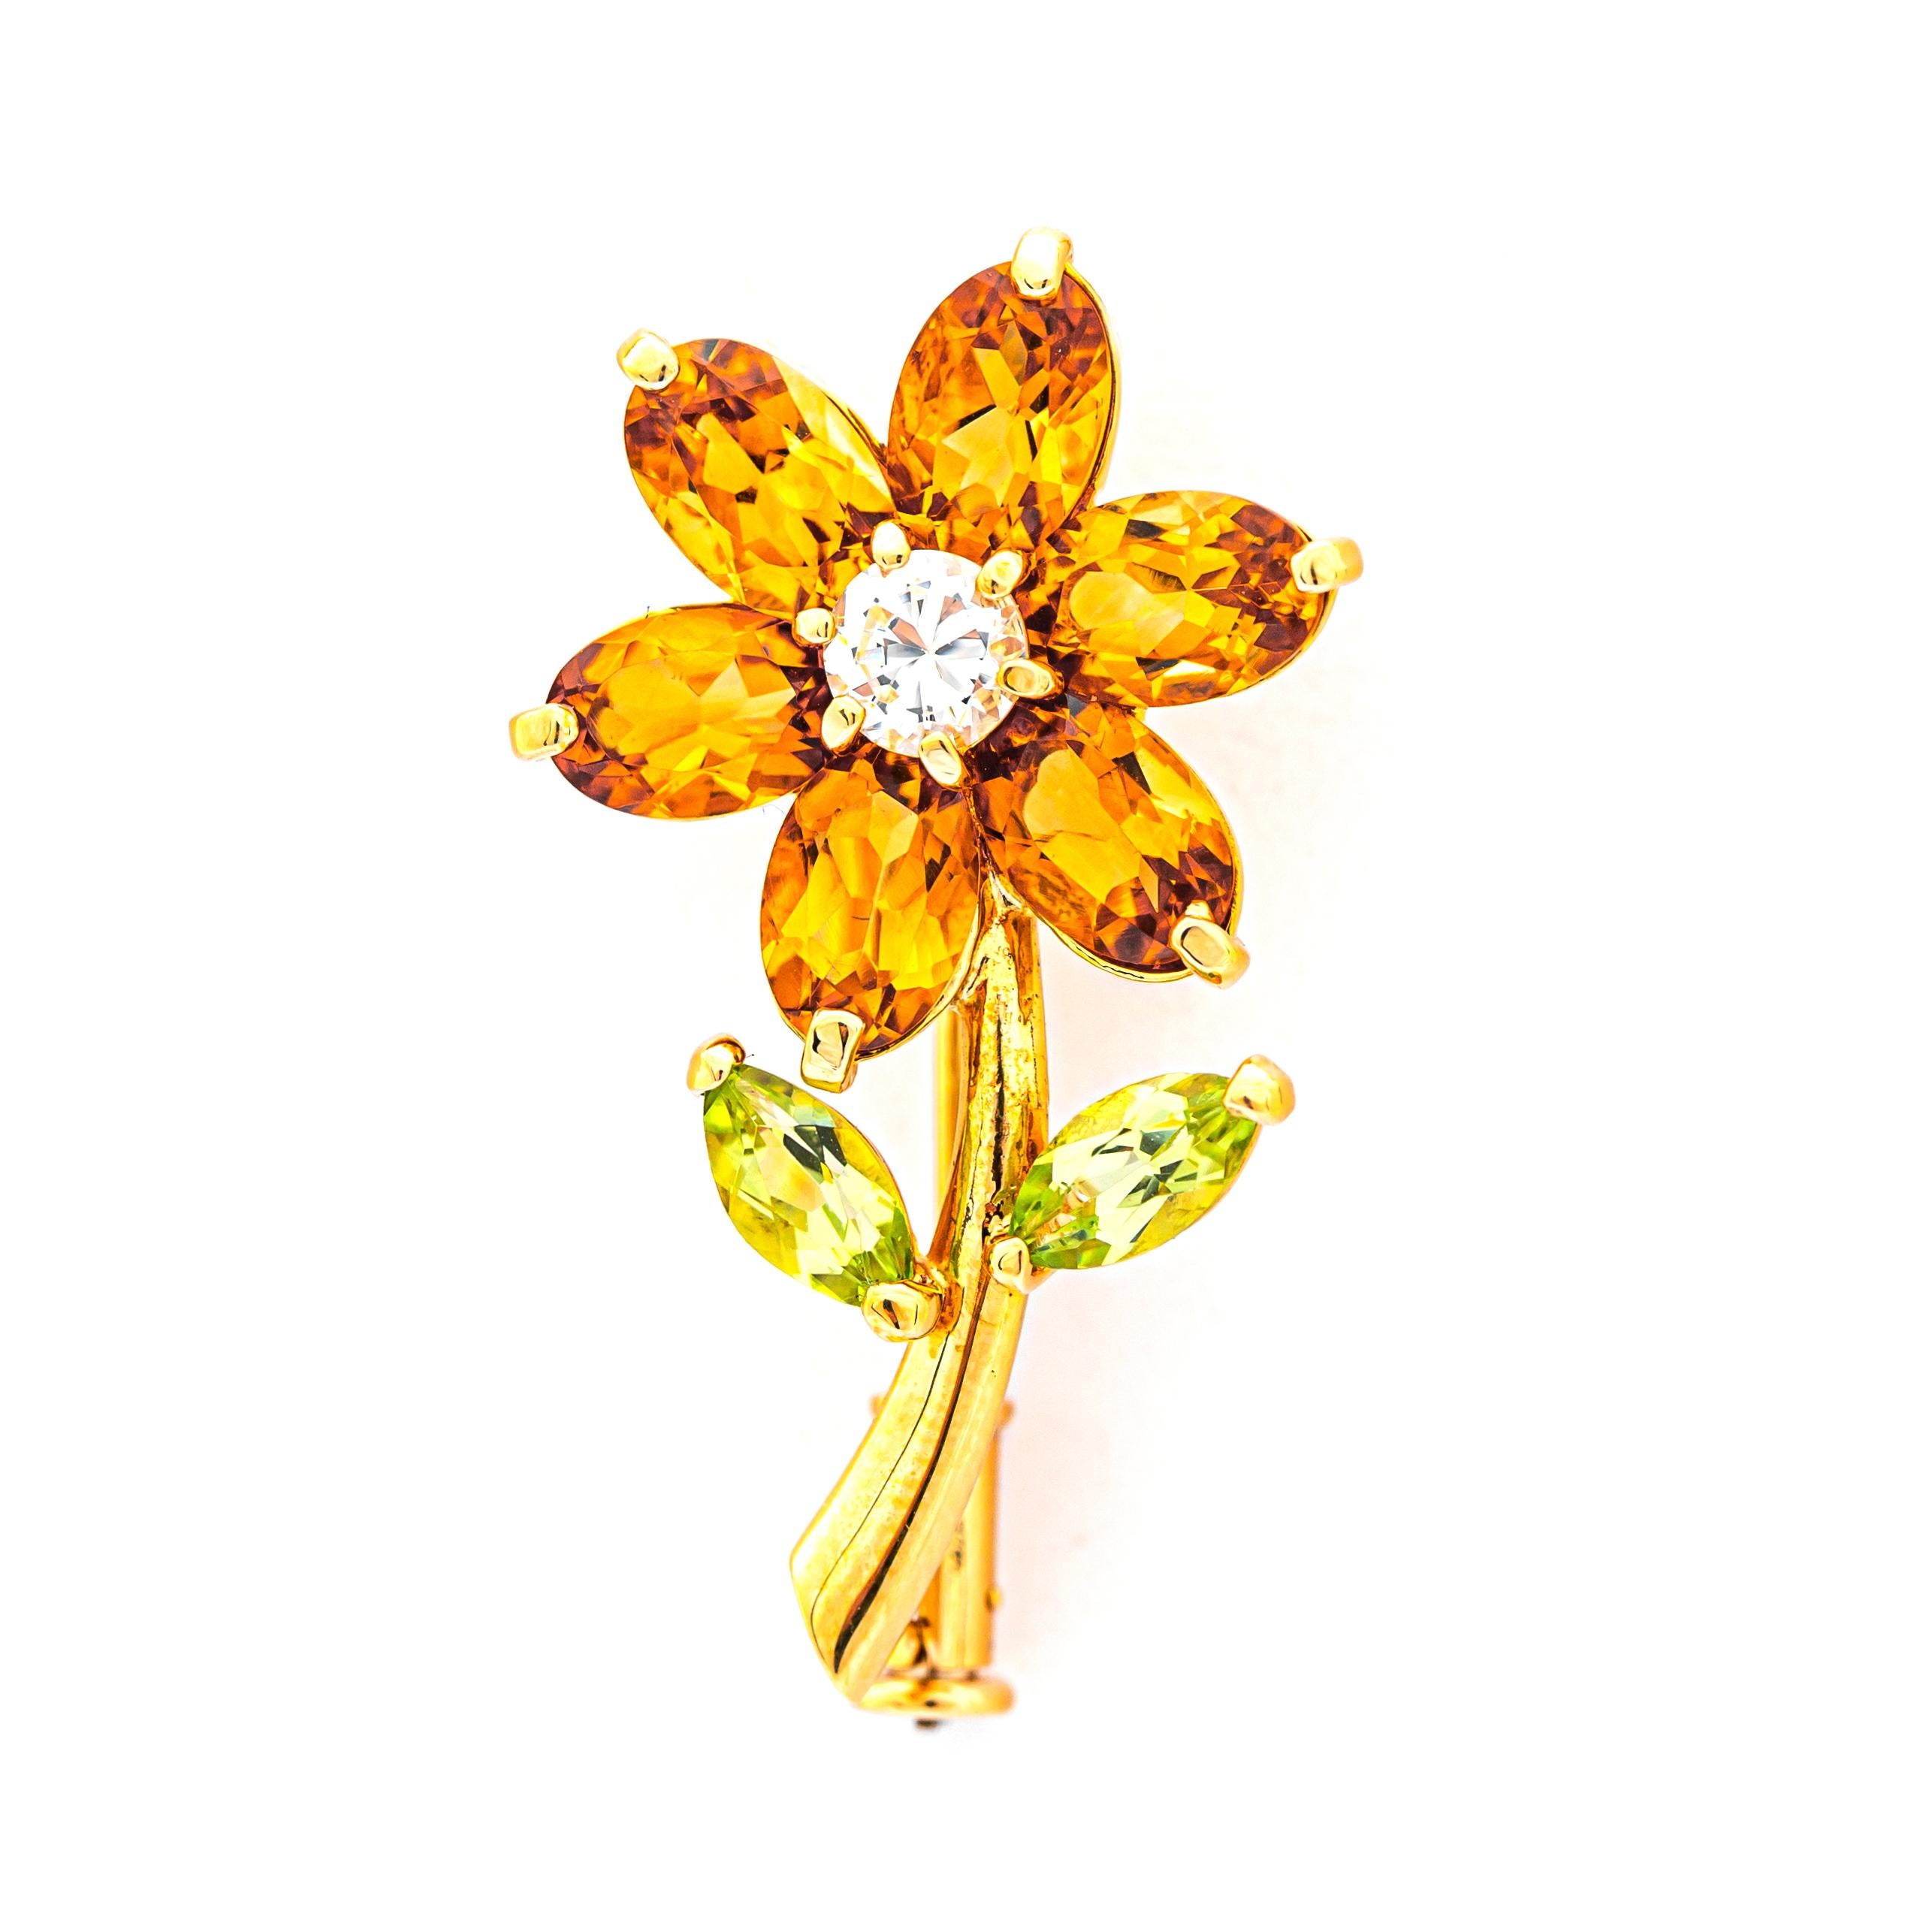 This lot is offered without any reserve price, starting bid $1, highest bid wins.

18k Yellow Gold Brooch set with 5.20 ct Citrine, Peridot, and Cubic Zircon.

Color Grading: Yellow, Green, White
Clarity Grading: Transparent
Total Carat Weight: